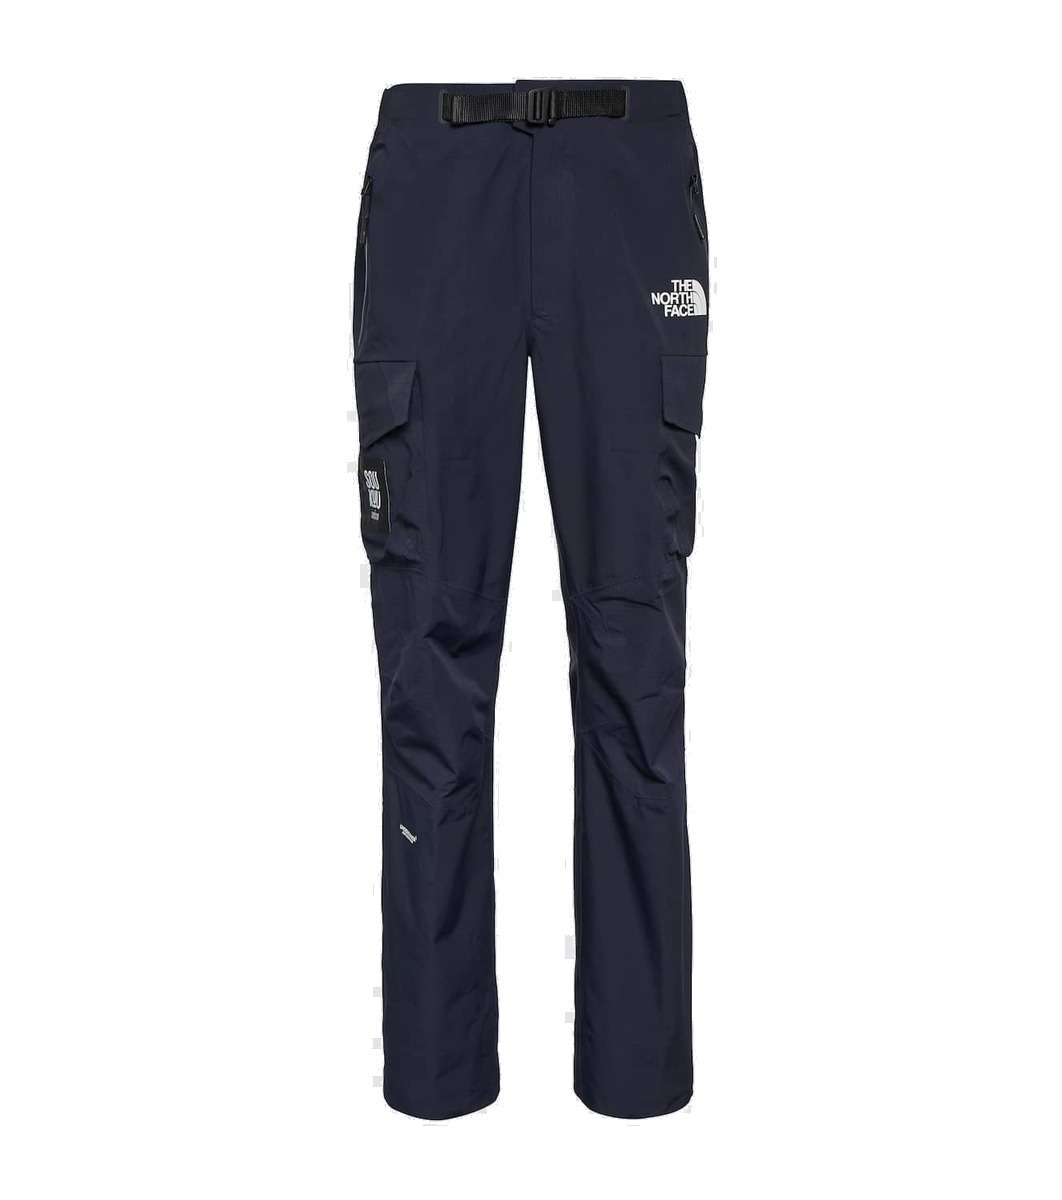 Photo: The North Face x Undercover cargo pants